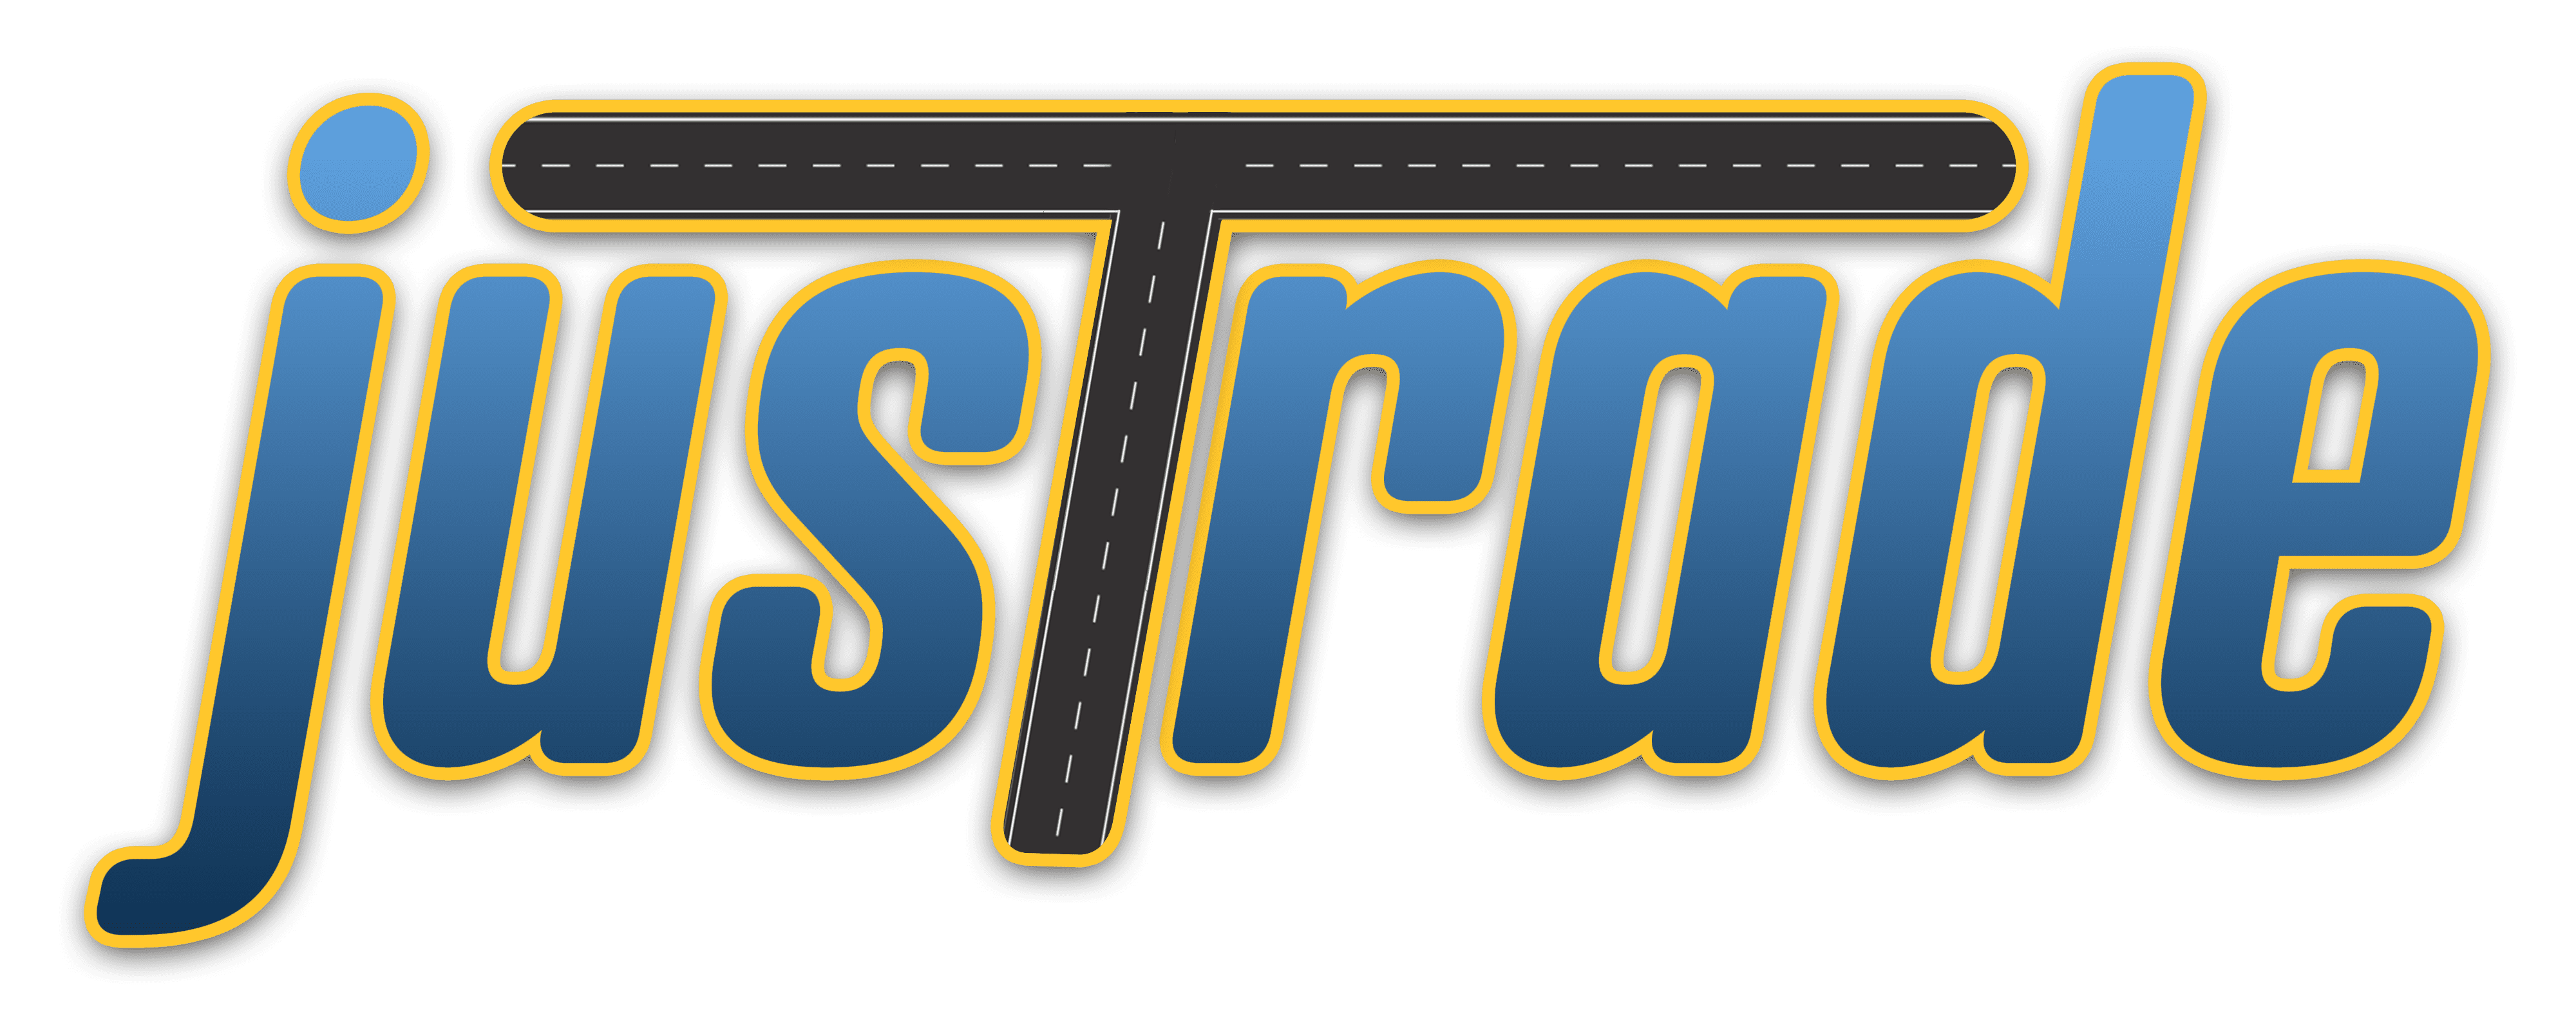 The picture is a logo for "CarPair". The text "CarPair" is in bold letters with a blue fill and a yellow outline. The letter "P" in "Pair" is stylized to look like a road with a dashed line in the middle. The background of the image is white.